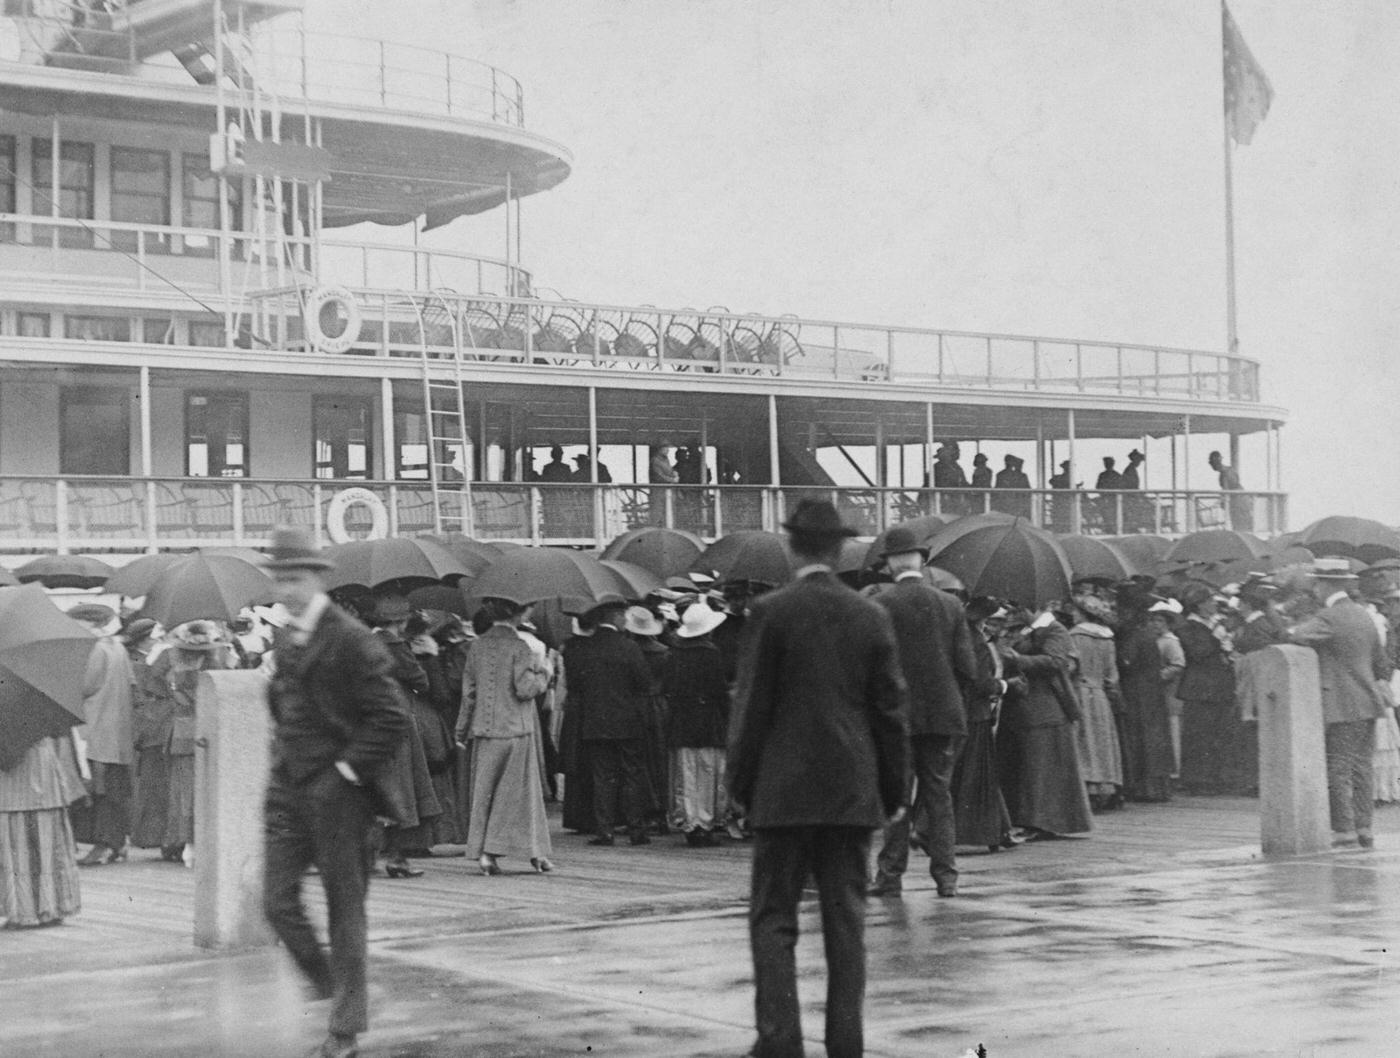 Suffragettes Waiting To Board The Mandalay, New York City, Circa 1915